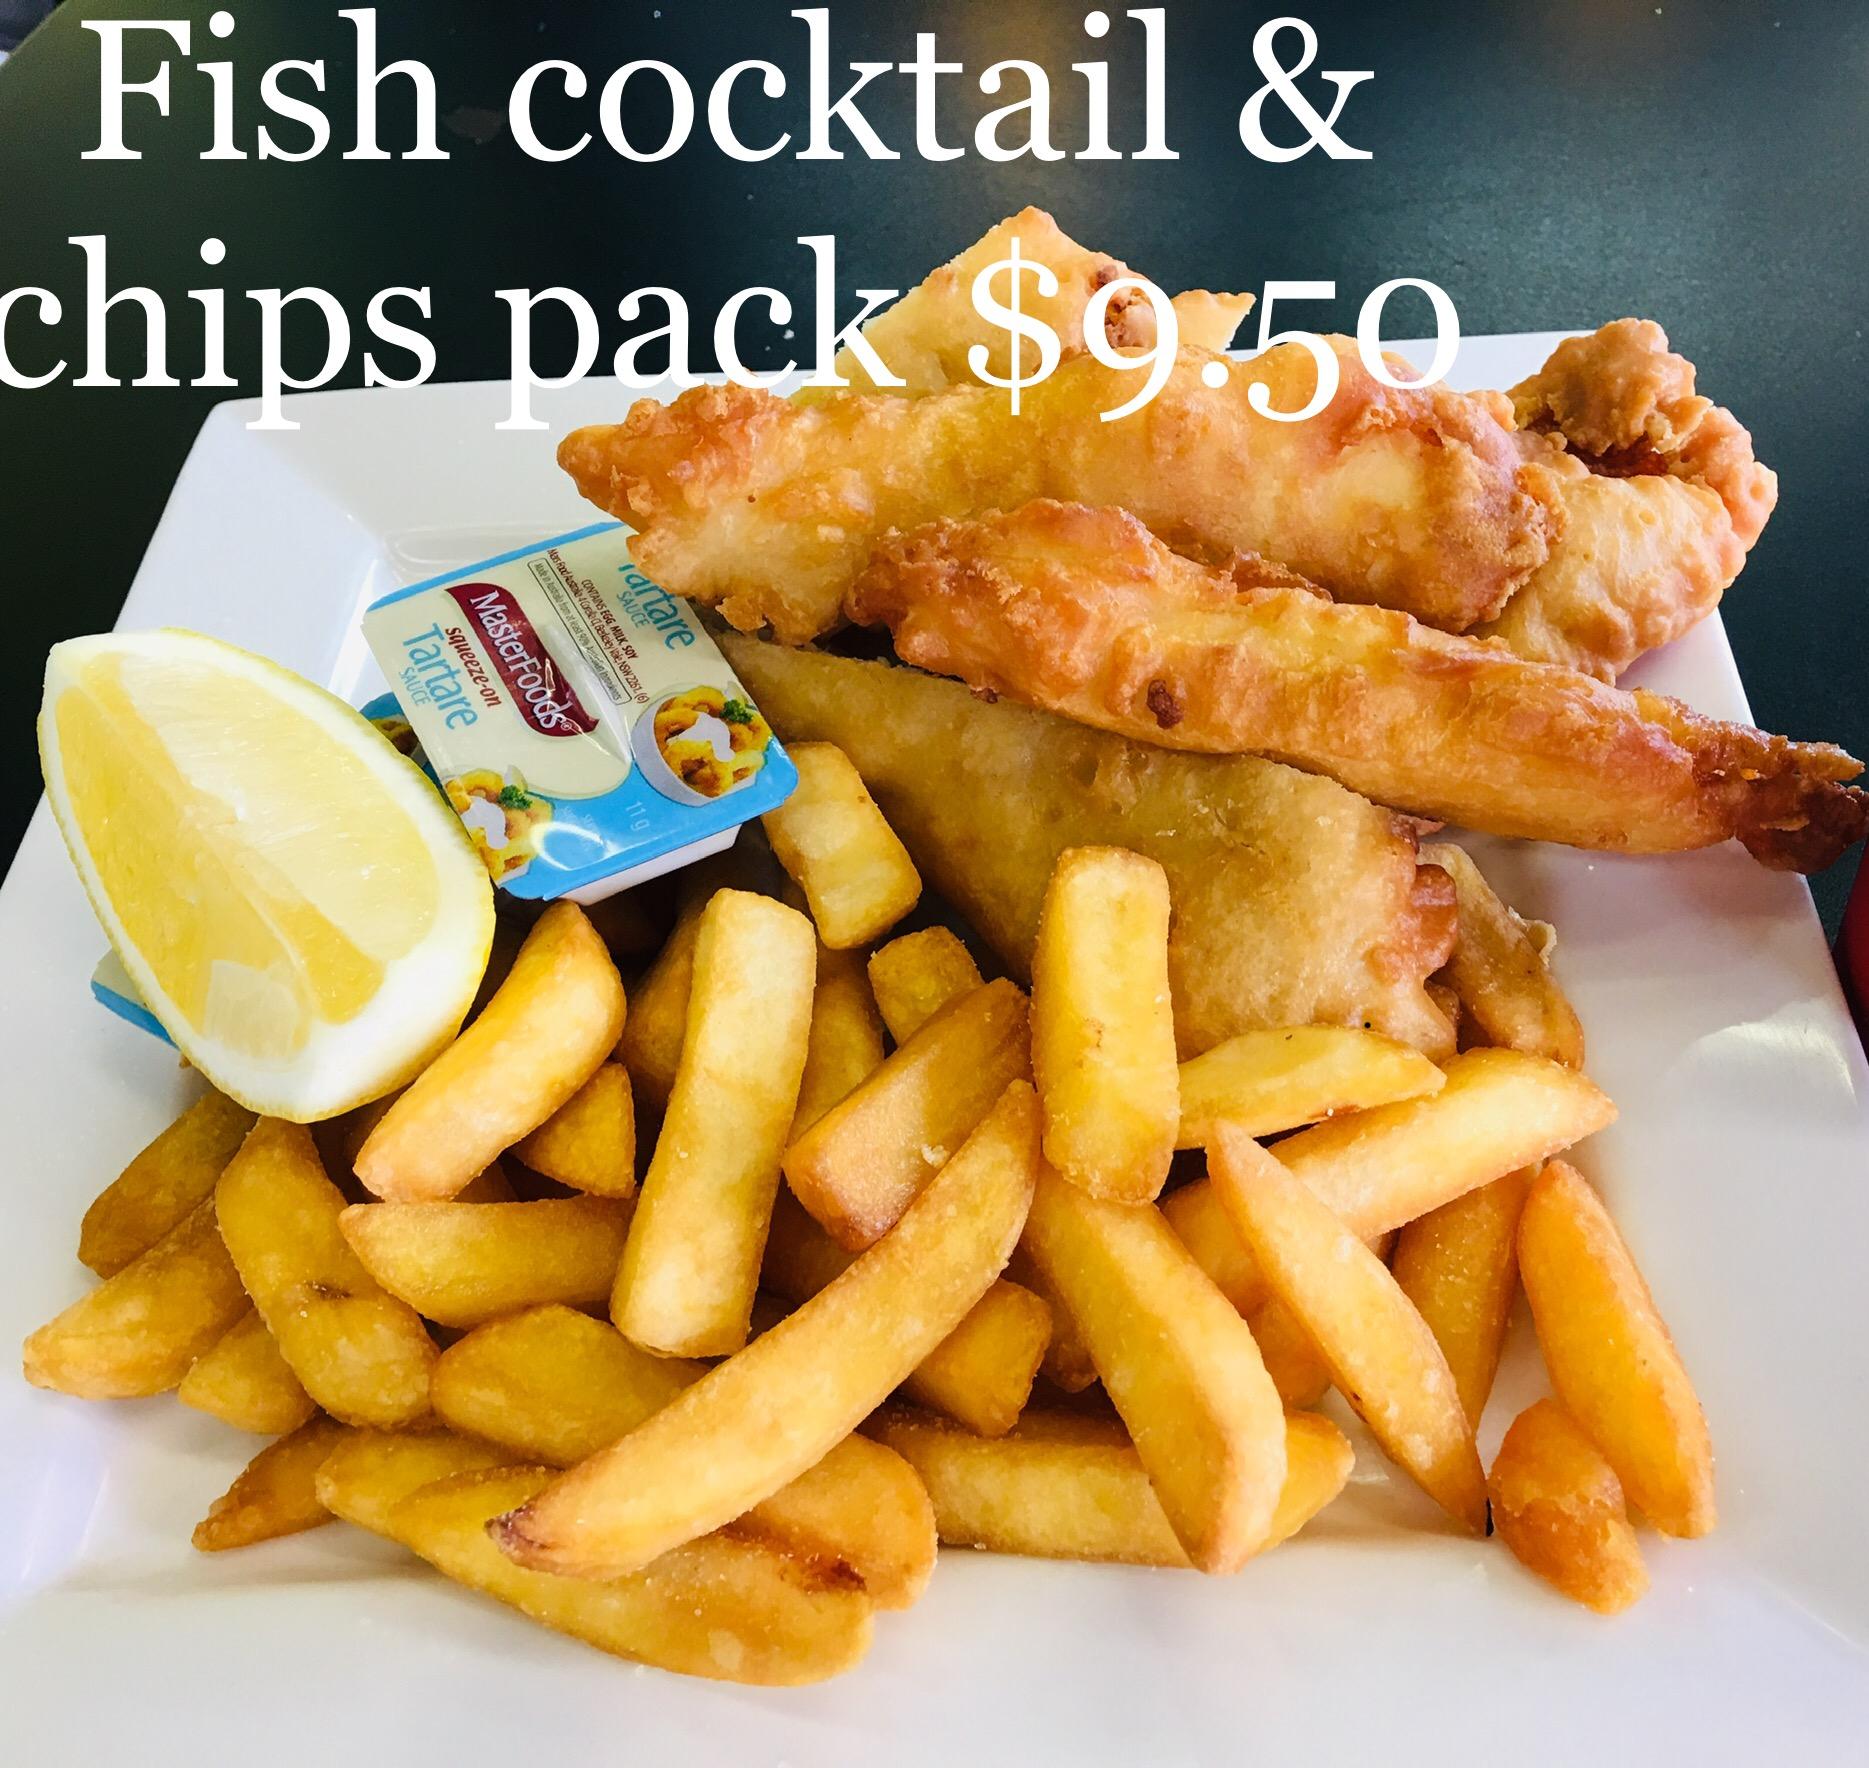 Matraville Chicken | meal takeaway | 167 Perry St, Matraville NSW 2036, Australia | 61293114810 OR +61 2 9311 4810